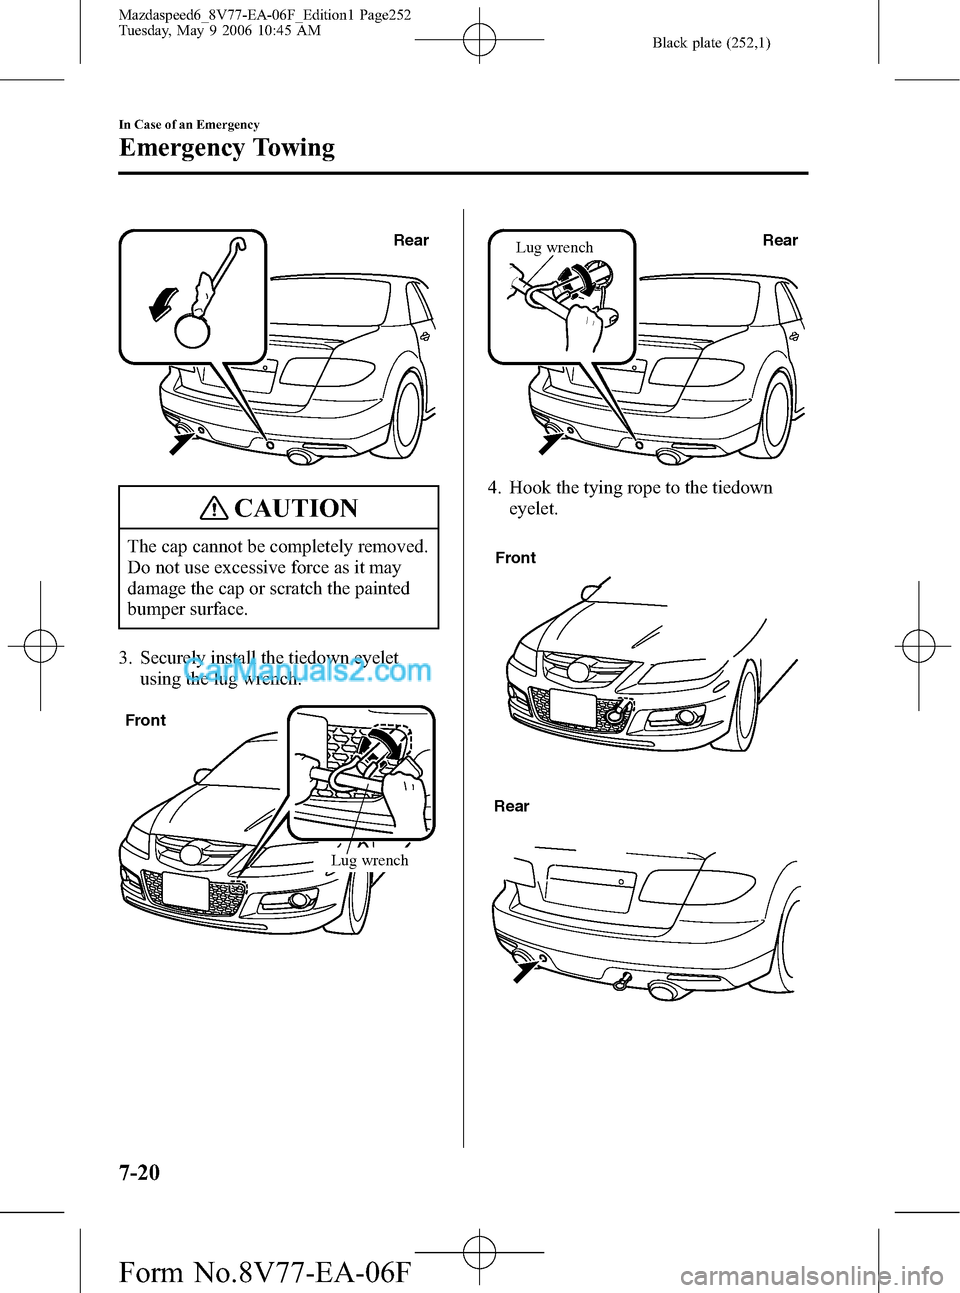 MAZDA MODEL MAZDASPEED 6 2007  Owners Manual (in English) Black plate (252,1)
Rear
CAUTION
The cap cannot be completely removed.
Do not use excessive force as it may
damage the cap or scratch the painted
bumper surface.
3. Securely install the tiedown eyelet